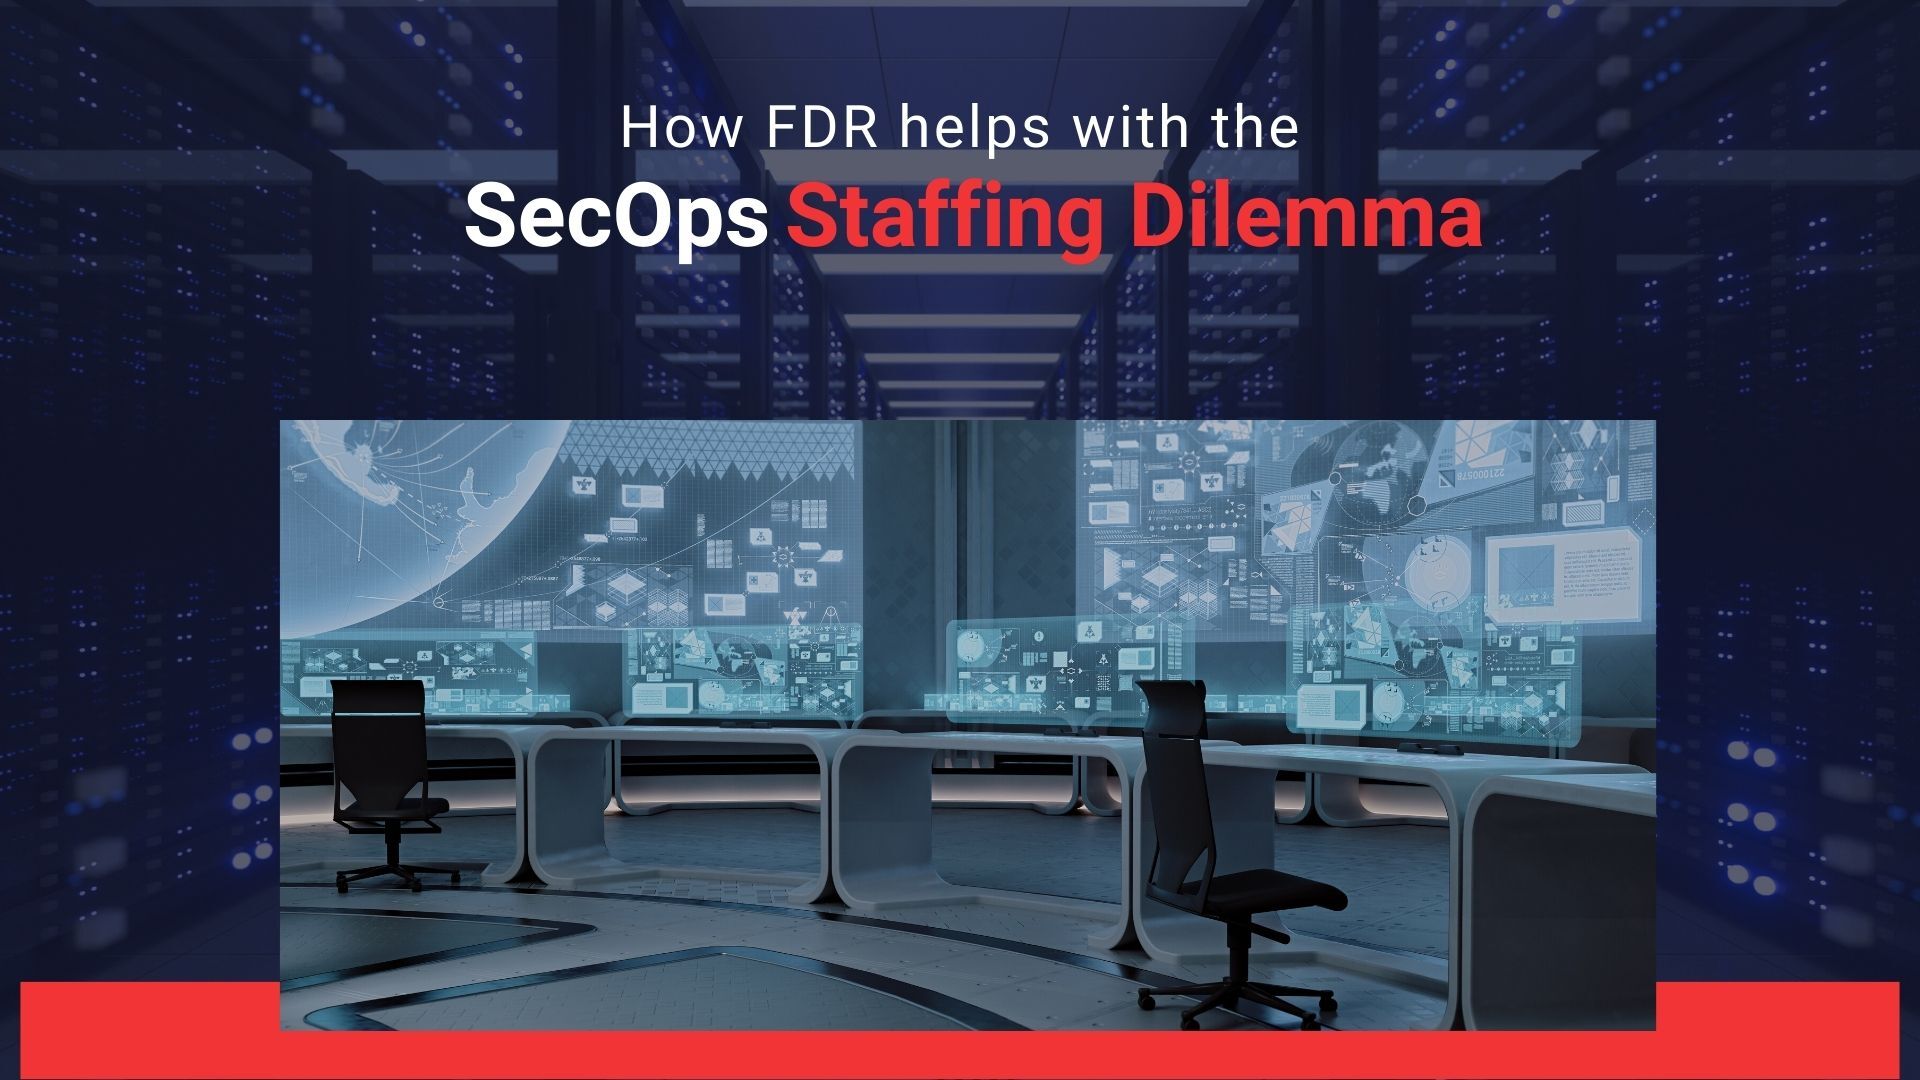 How FDR Helps with the SecOps Staffing Dilemma